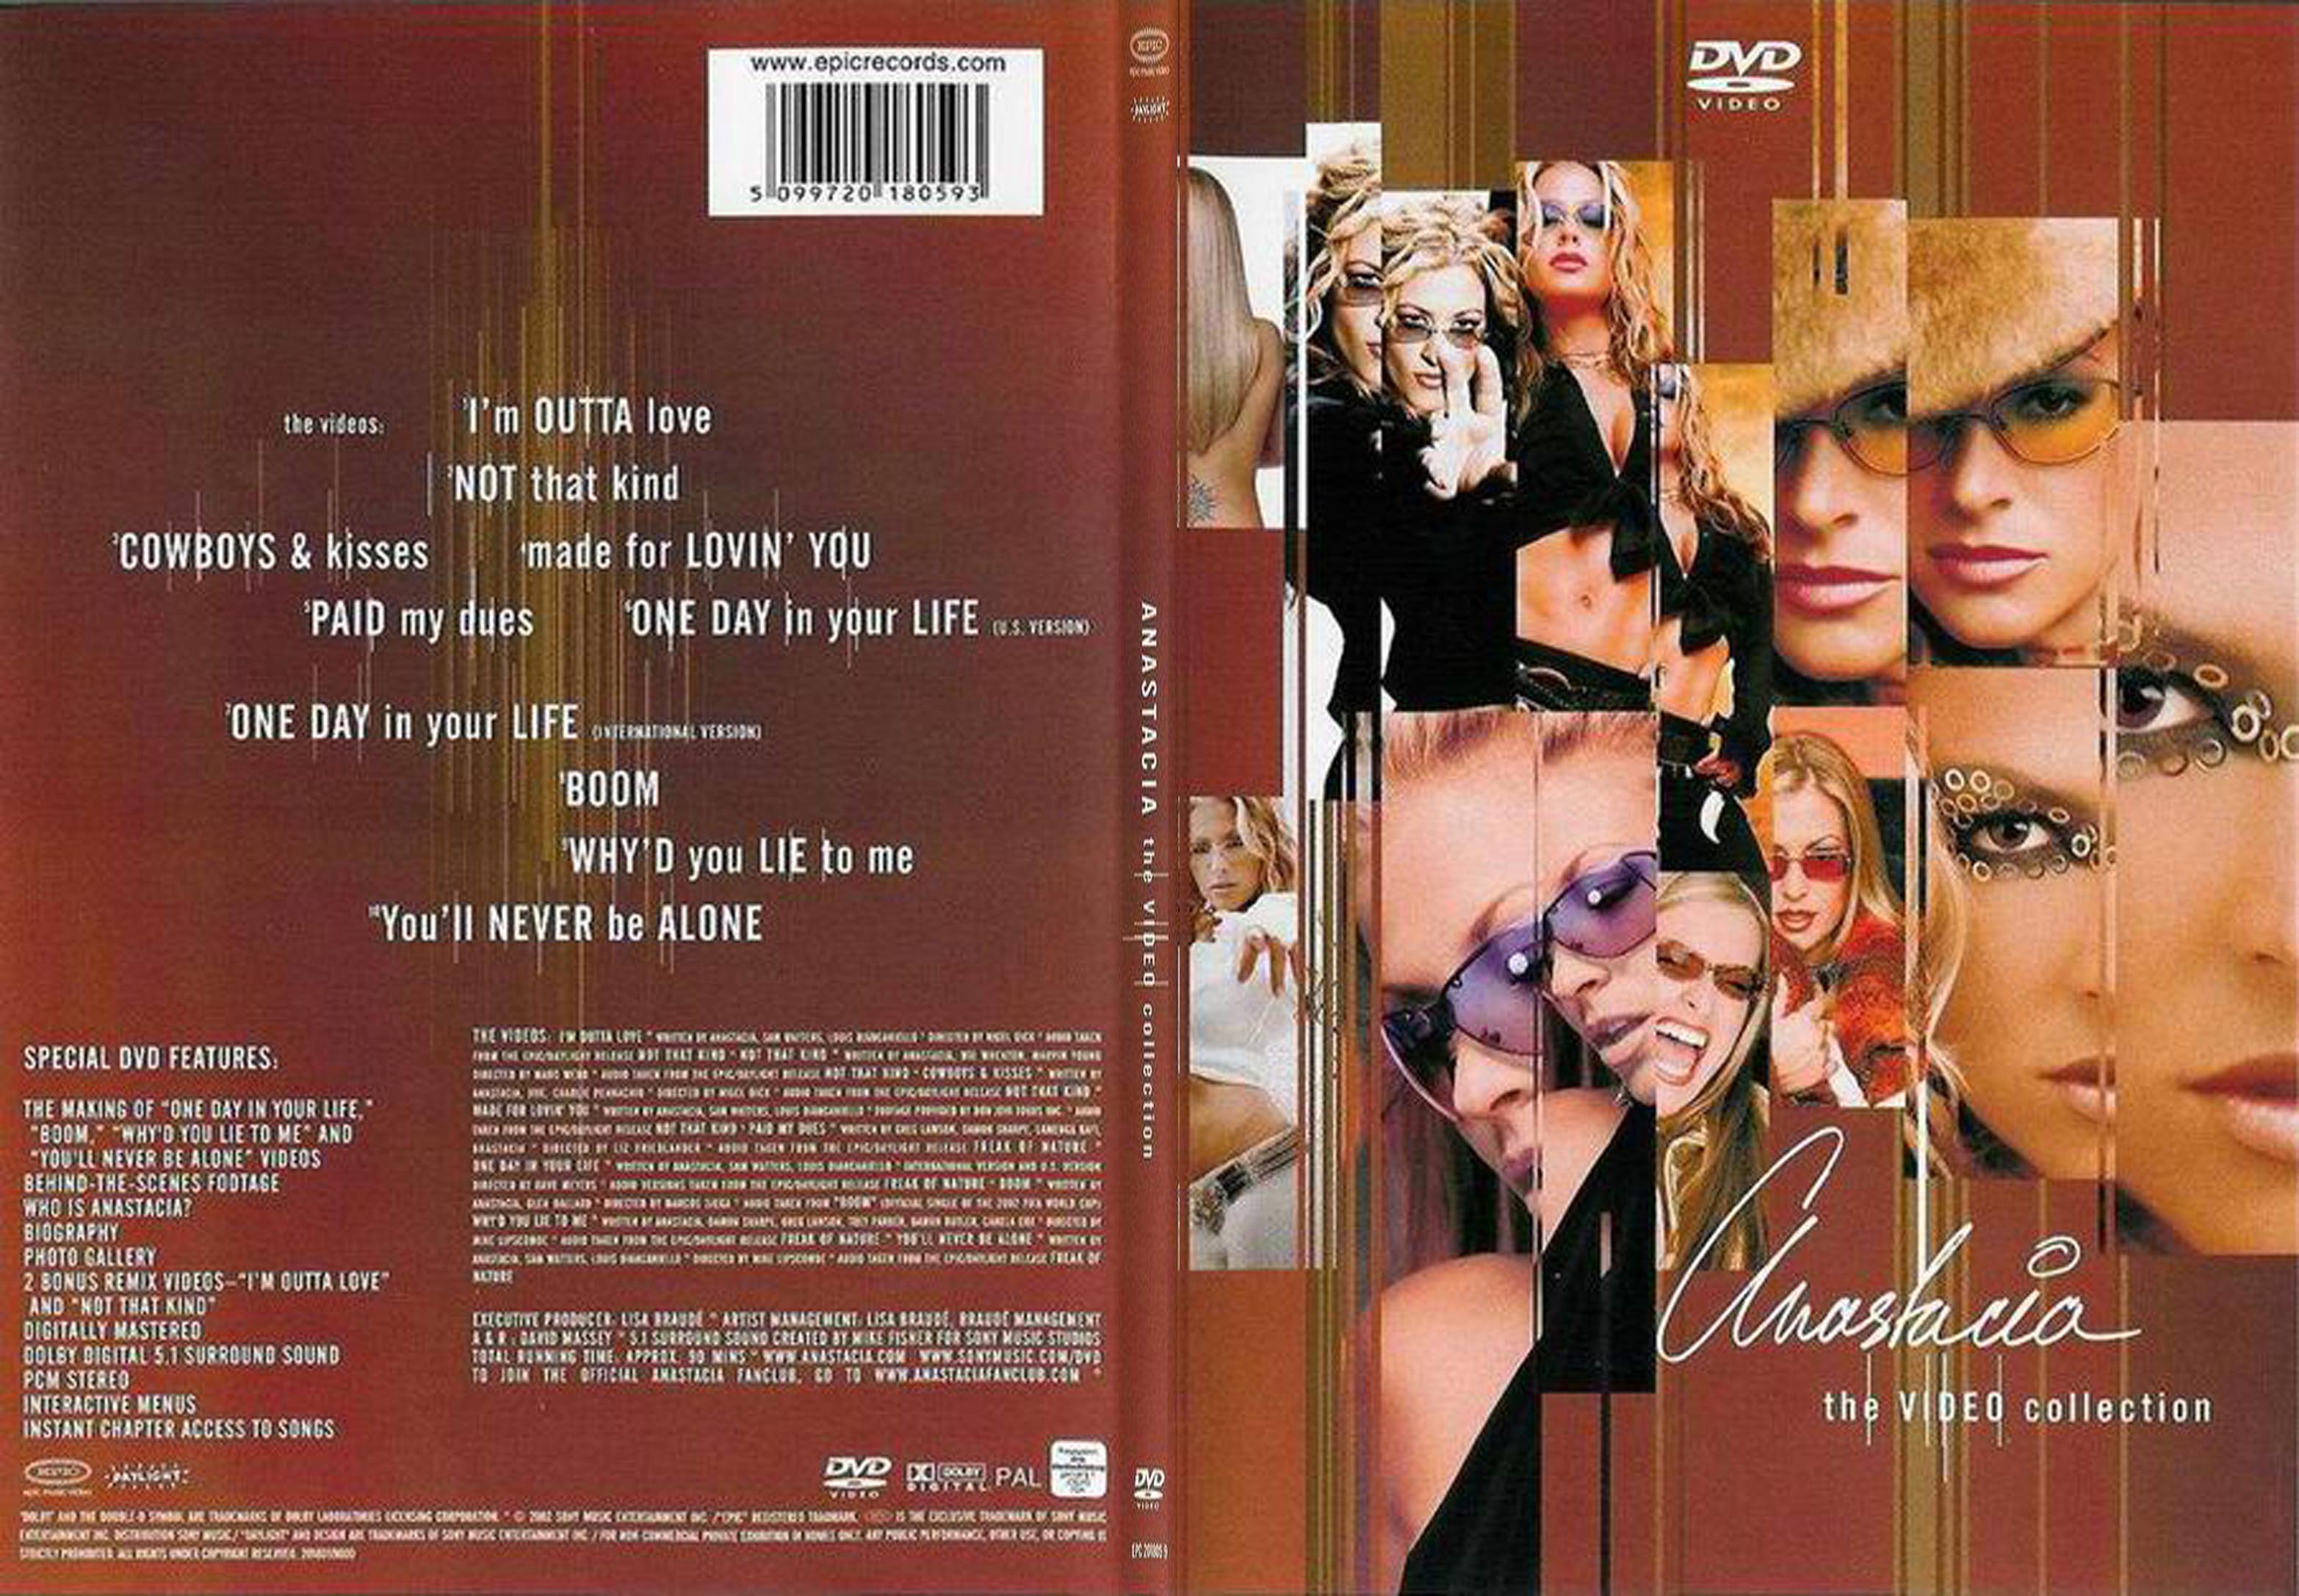 Jaquette DVD Anastacia The Video Collection - SLIM